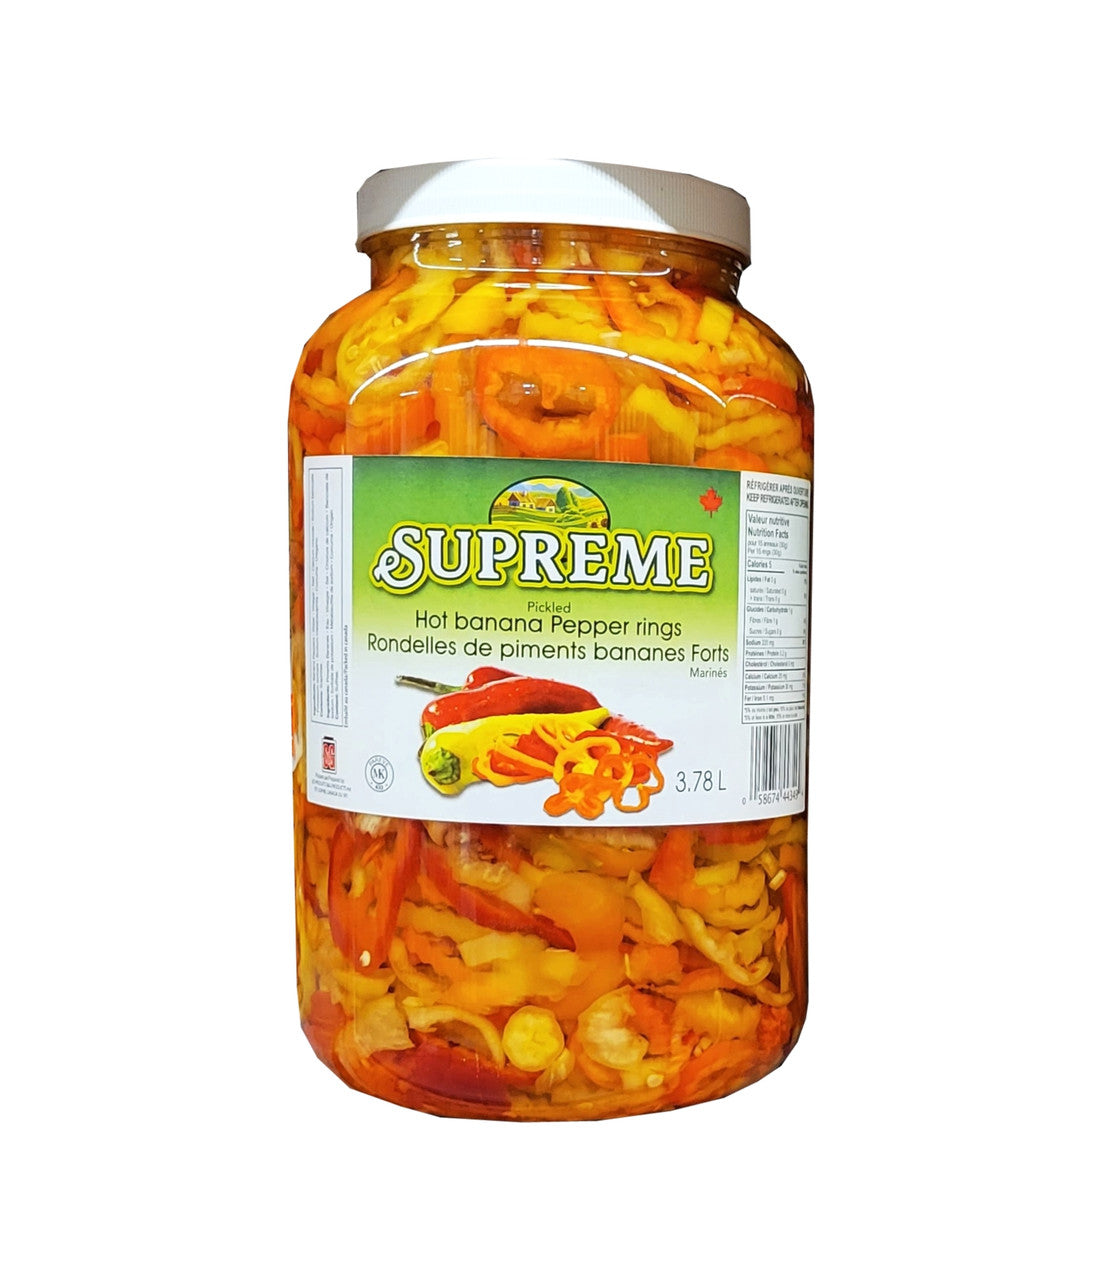 Supreme Pickled Hot Banana Pepper Rings, 3.78L/1 Gallon Jar {Imported from Canada}